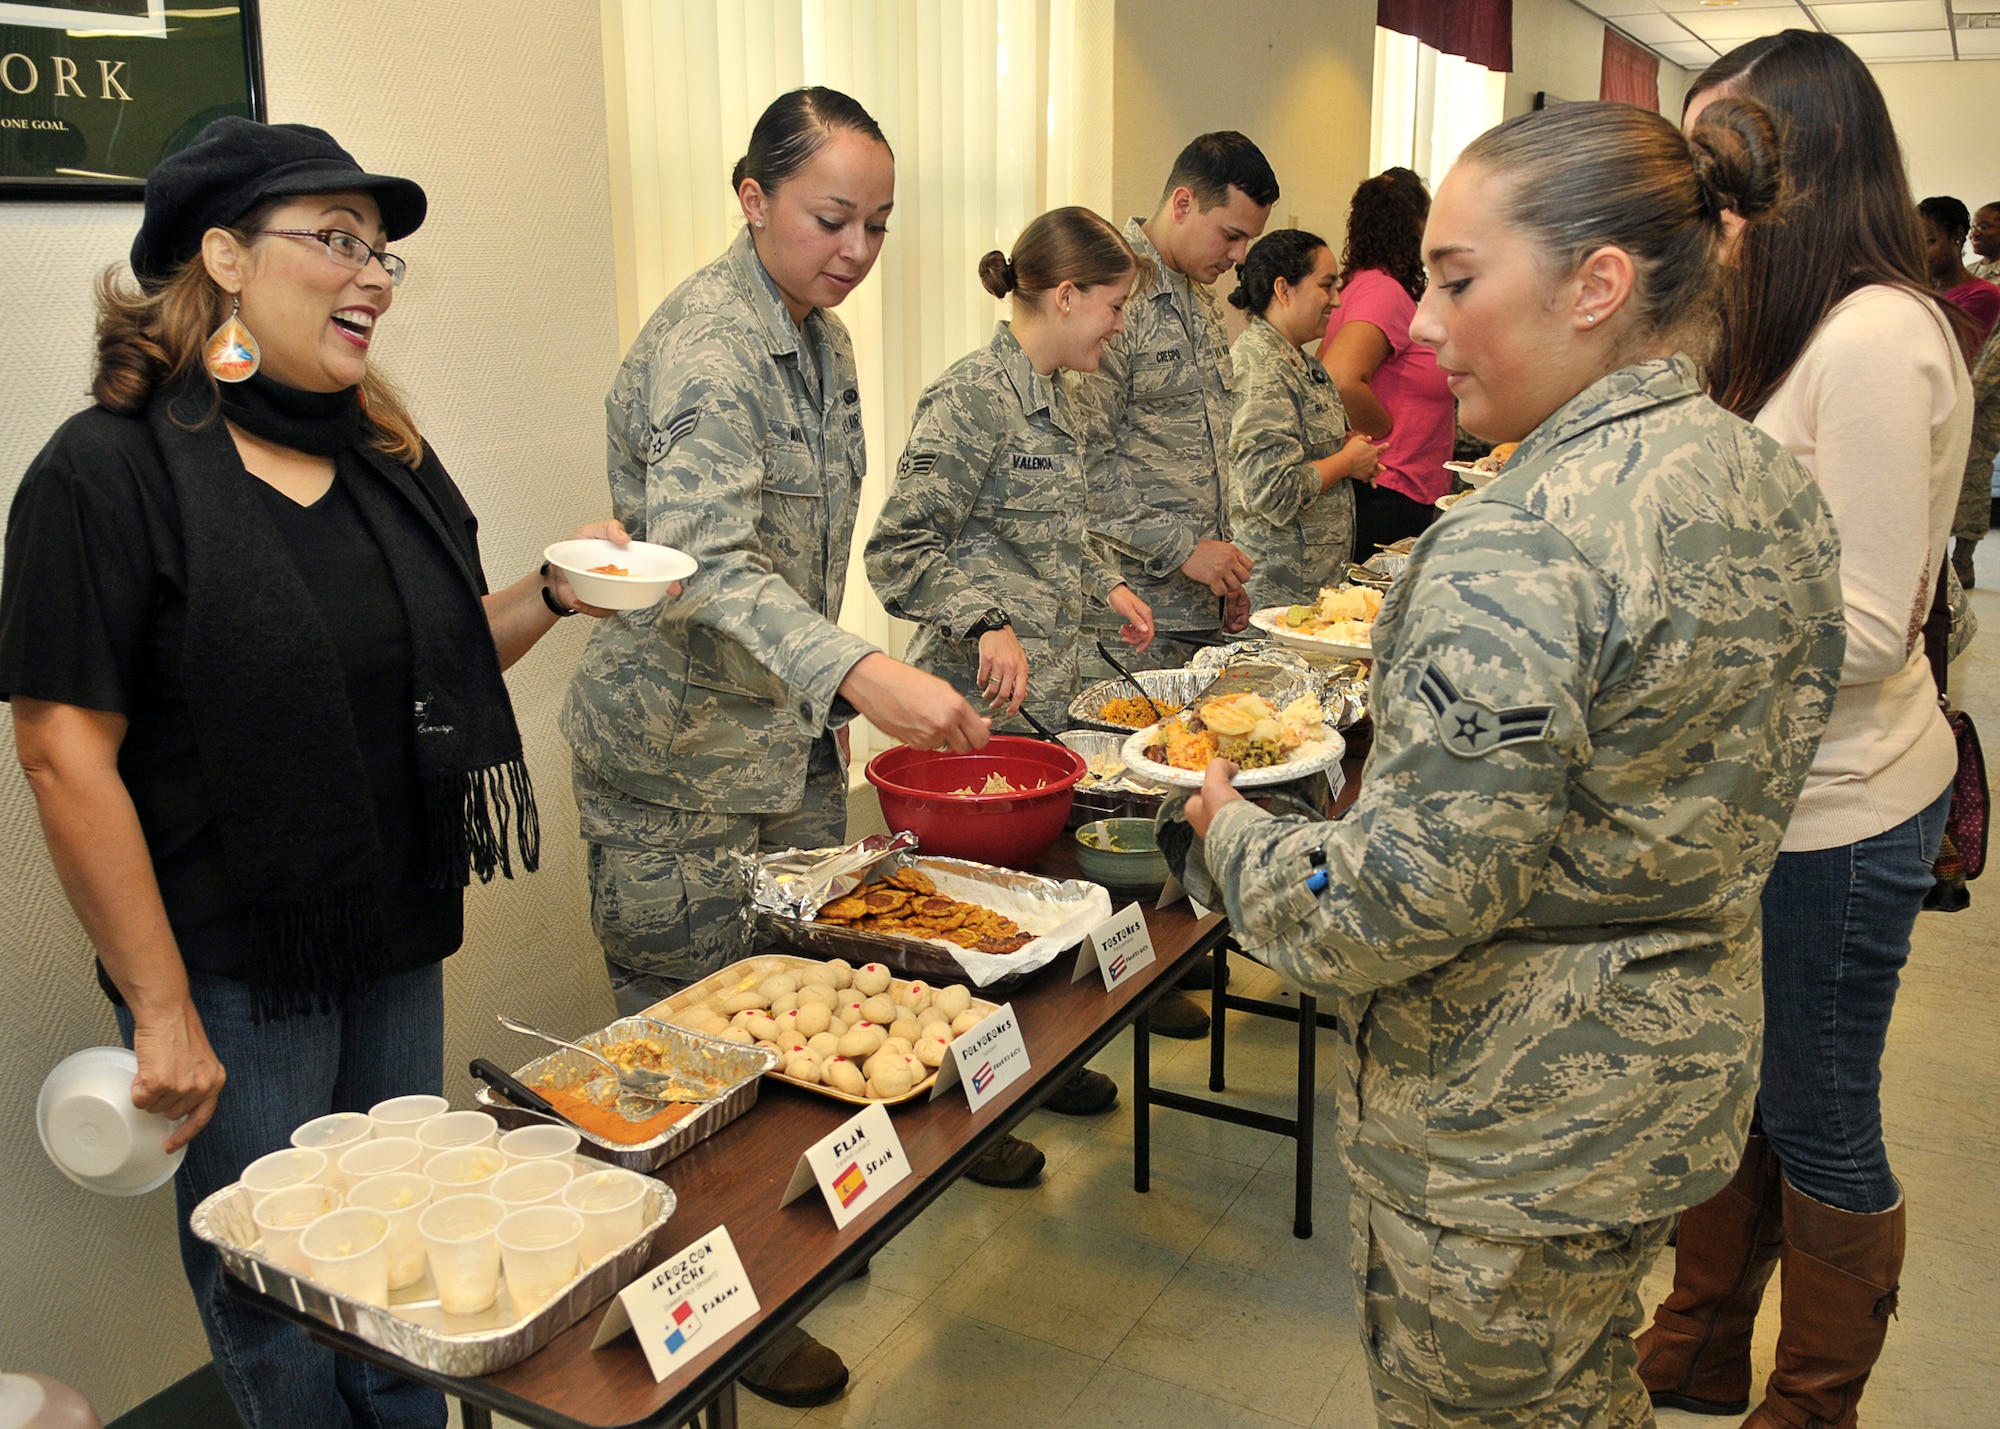 Volunteers at the Hispanic Heritage Month luncheon prepared dishes from their representative countries to highlight cultural diversity, while providing a tasty lunch to guests Oct. 25 at Chapel 2.  Some dishes included Panamanian arroz con leche, Spanish flan and Puerto Rican tostones, which were served to guests during the Hispanic Heritage Month. (U.S. Air Force photo by Airman 1st Class Sergio A. Gamboa)